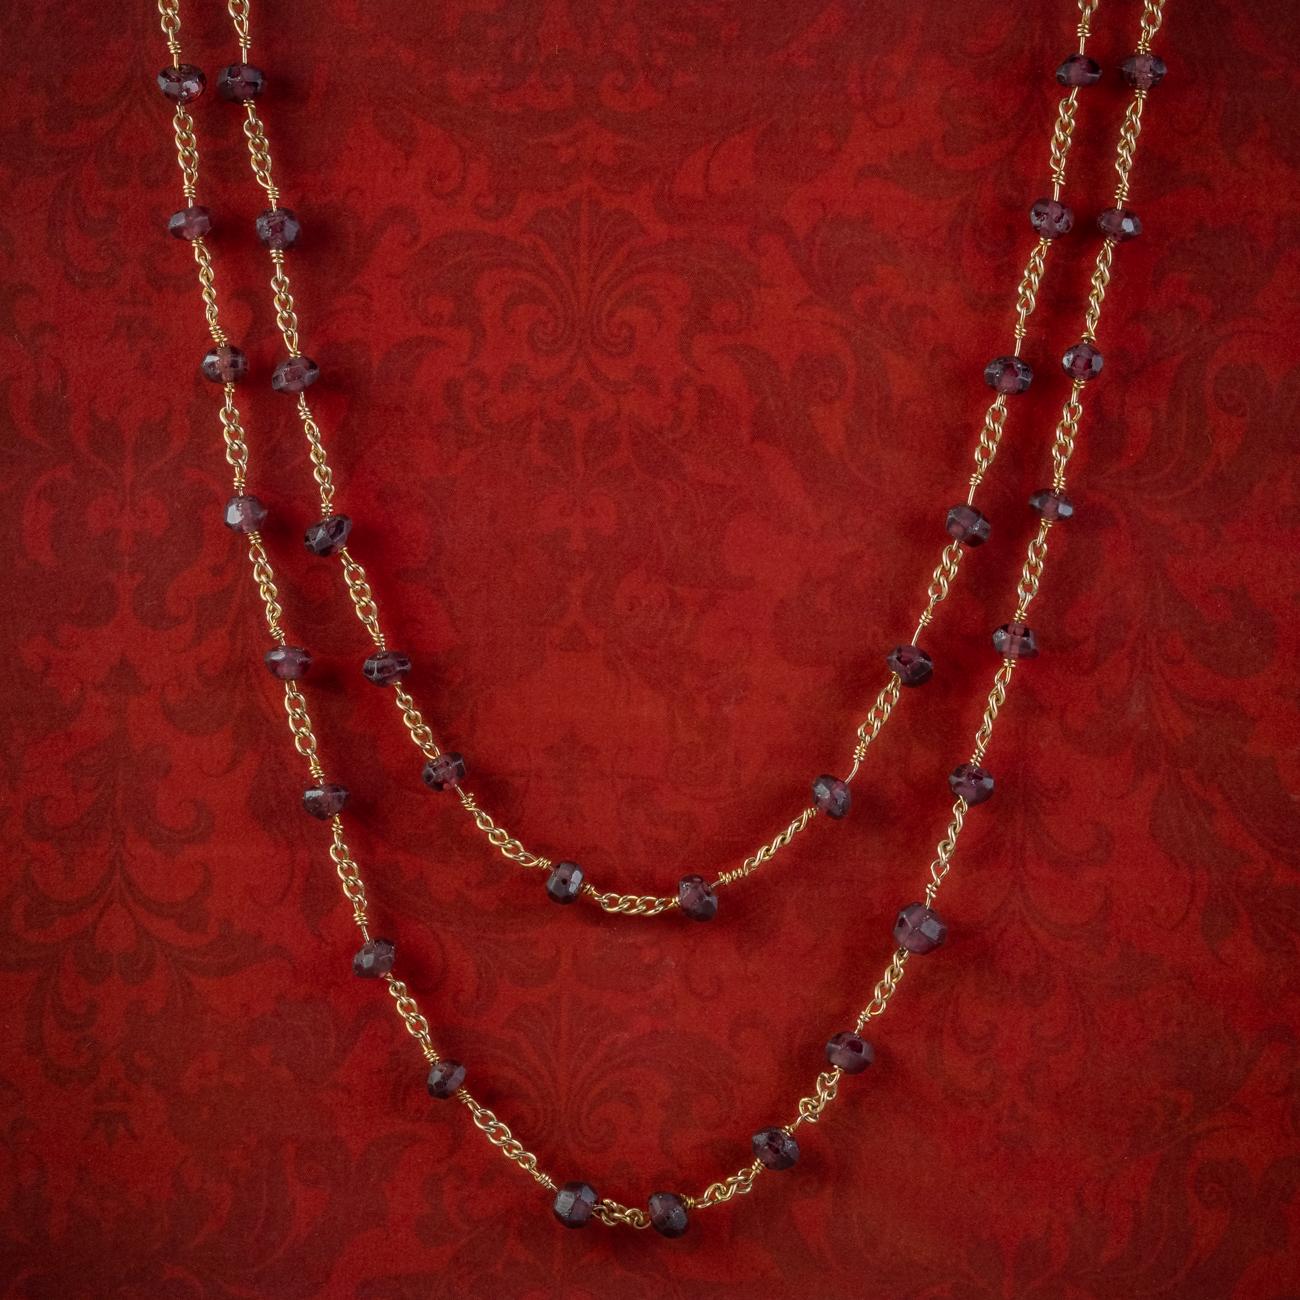 A magnificent antique Victorian guard chain from the late 19th Century decorated with faceted almandine garnet beads with a luxurious, deep violet/ red hue, connected by 9ct gold curb links and held by a ring clasp at the end. 

Guard chains were at